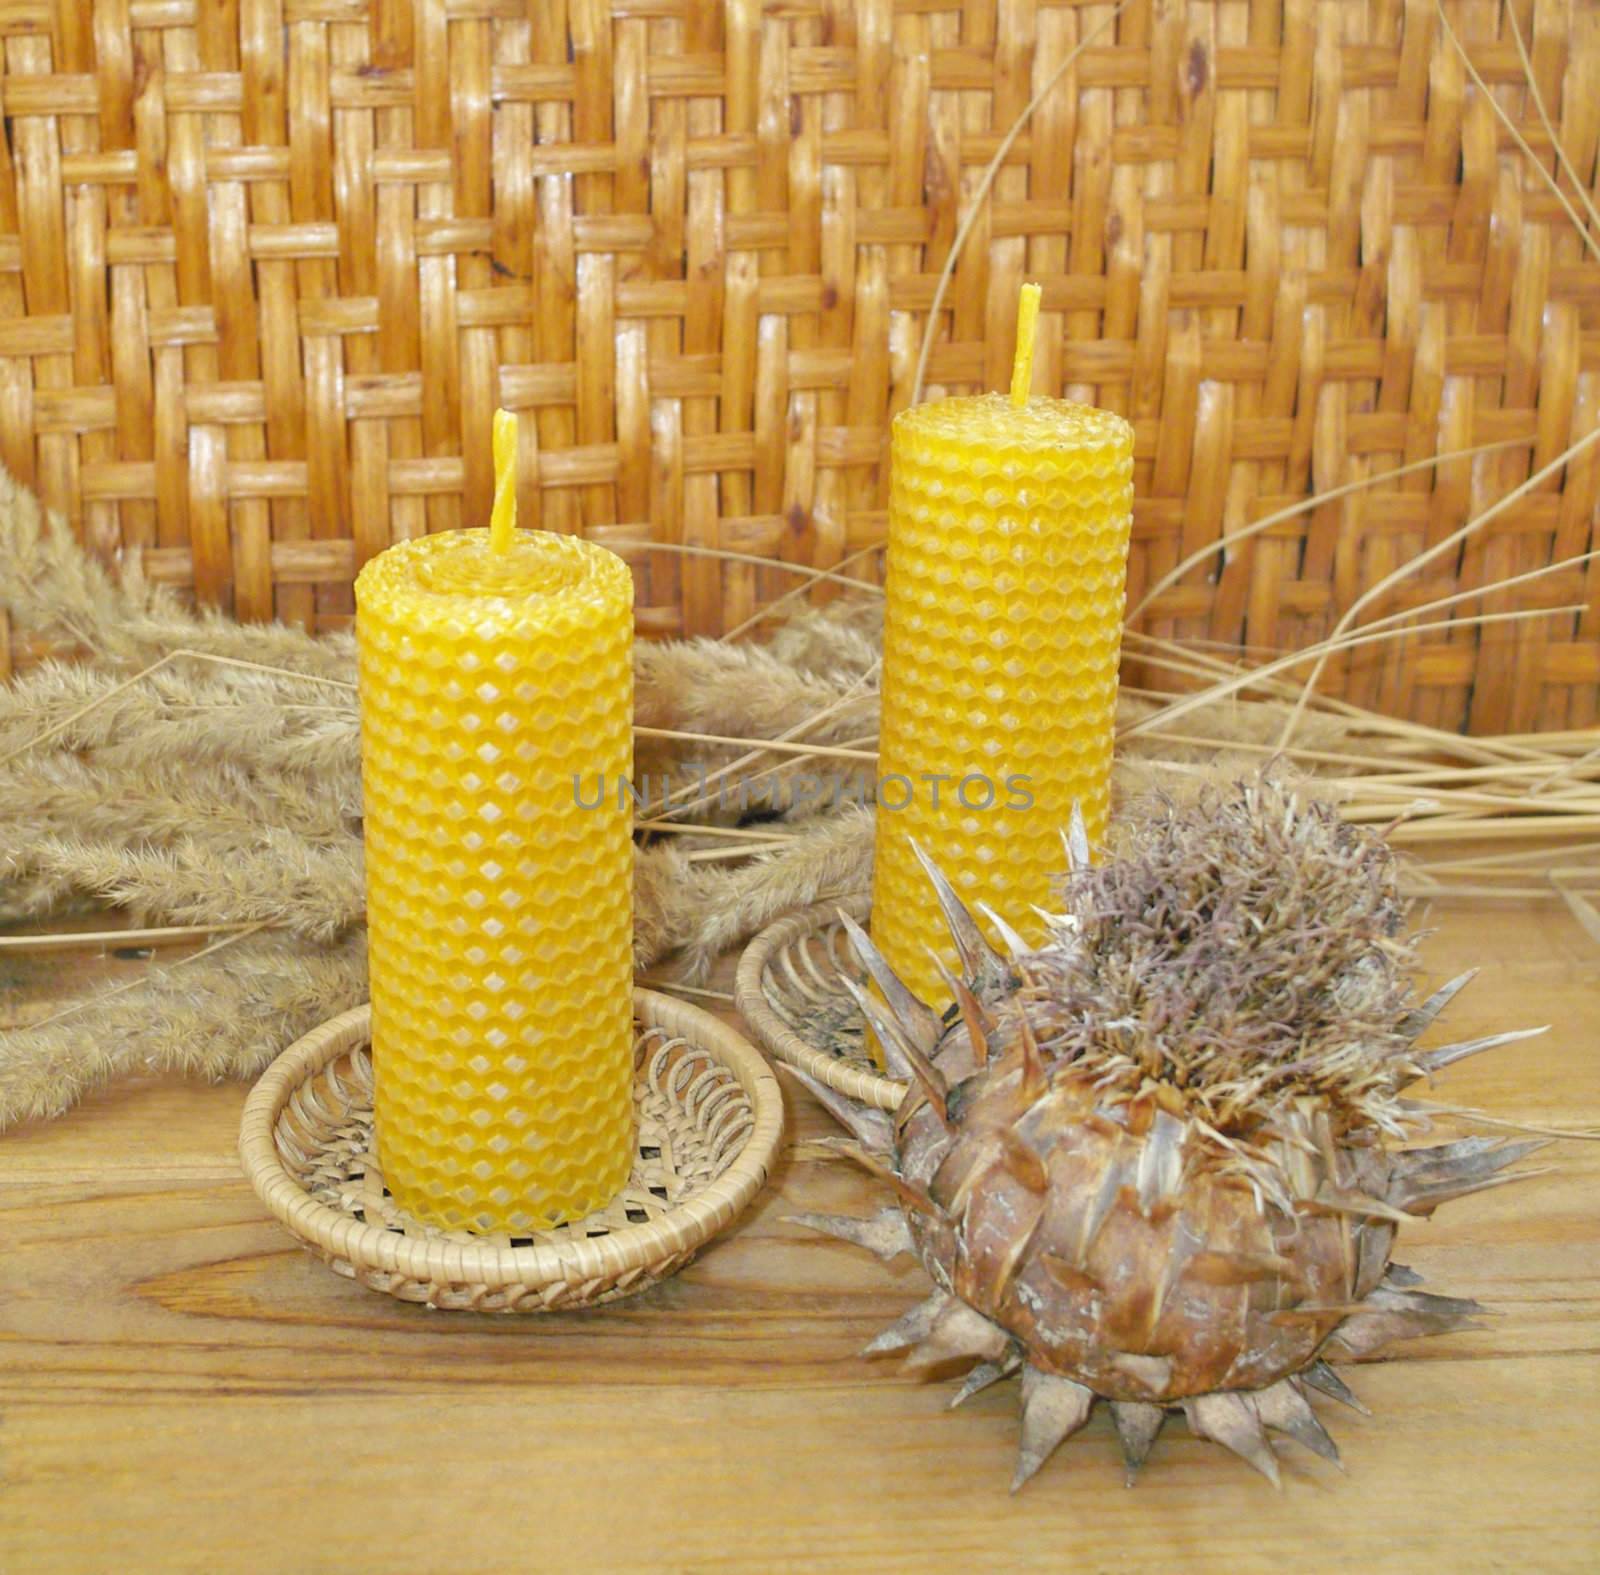 Beeswax candles by sattva